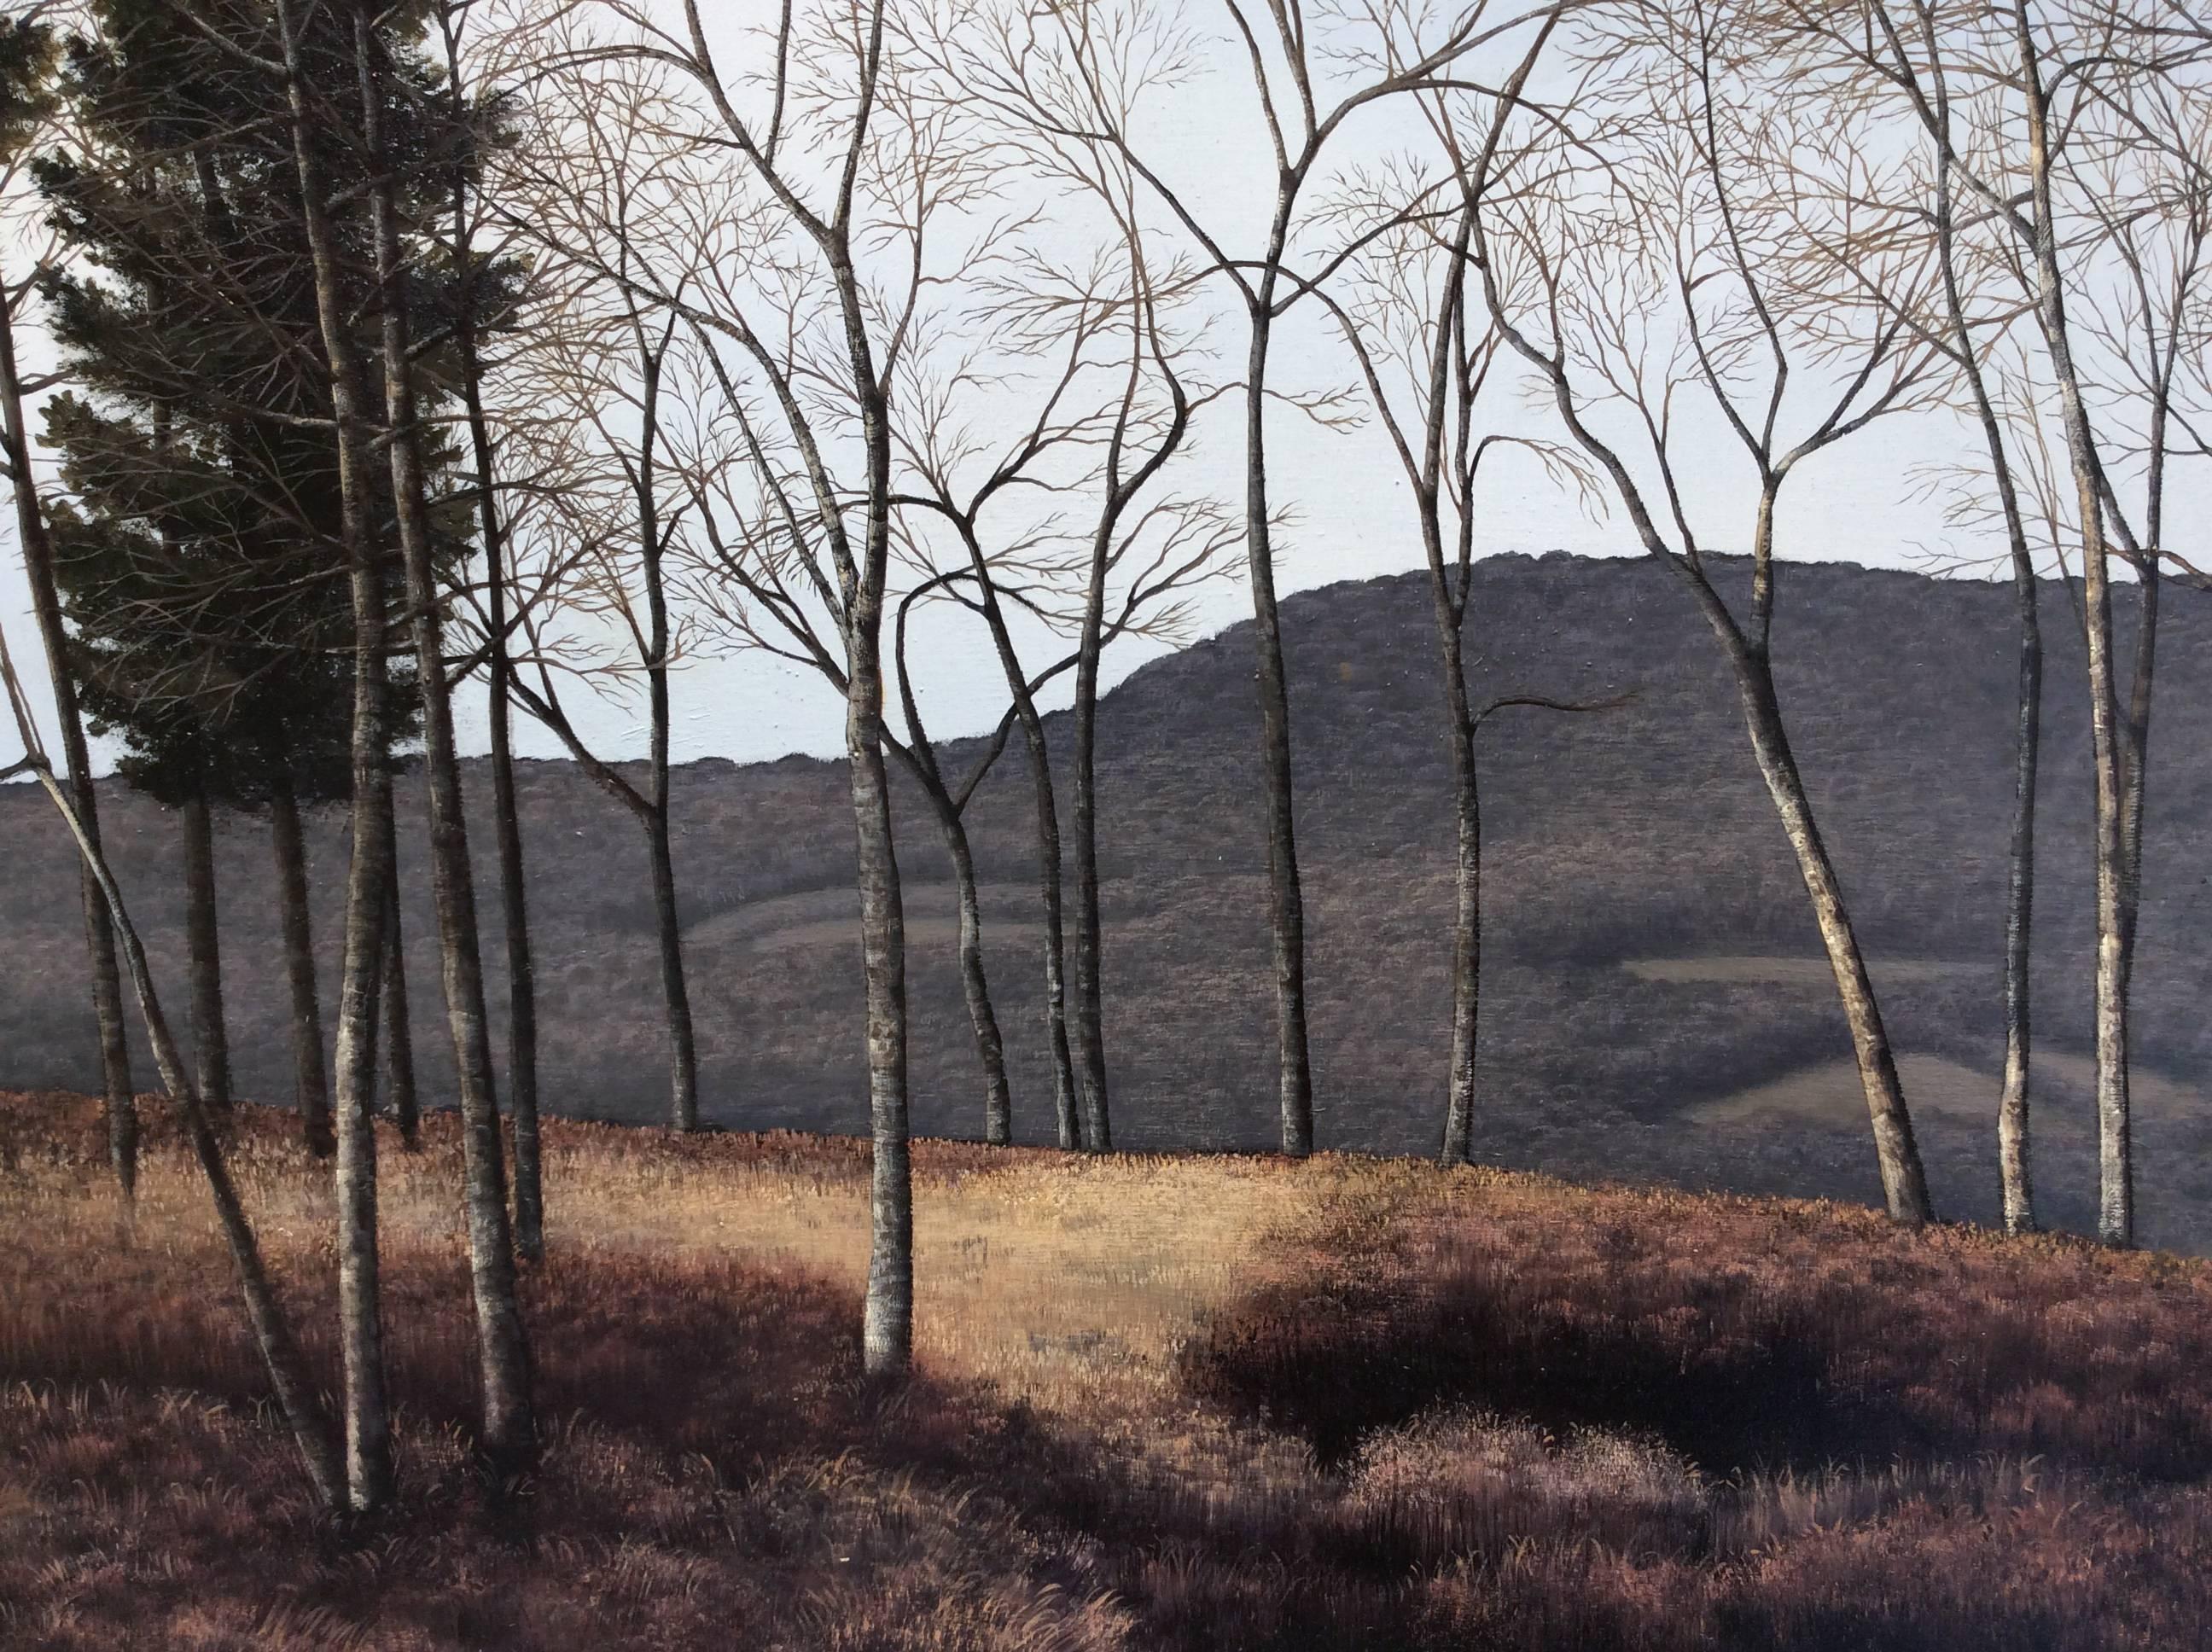 Stagger (Hyper Realist Late Autumn Landscape Painting on Wood Panel) 2